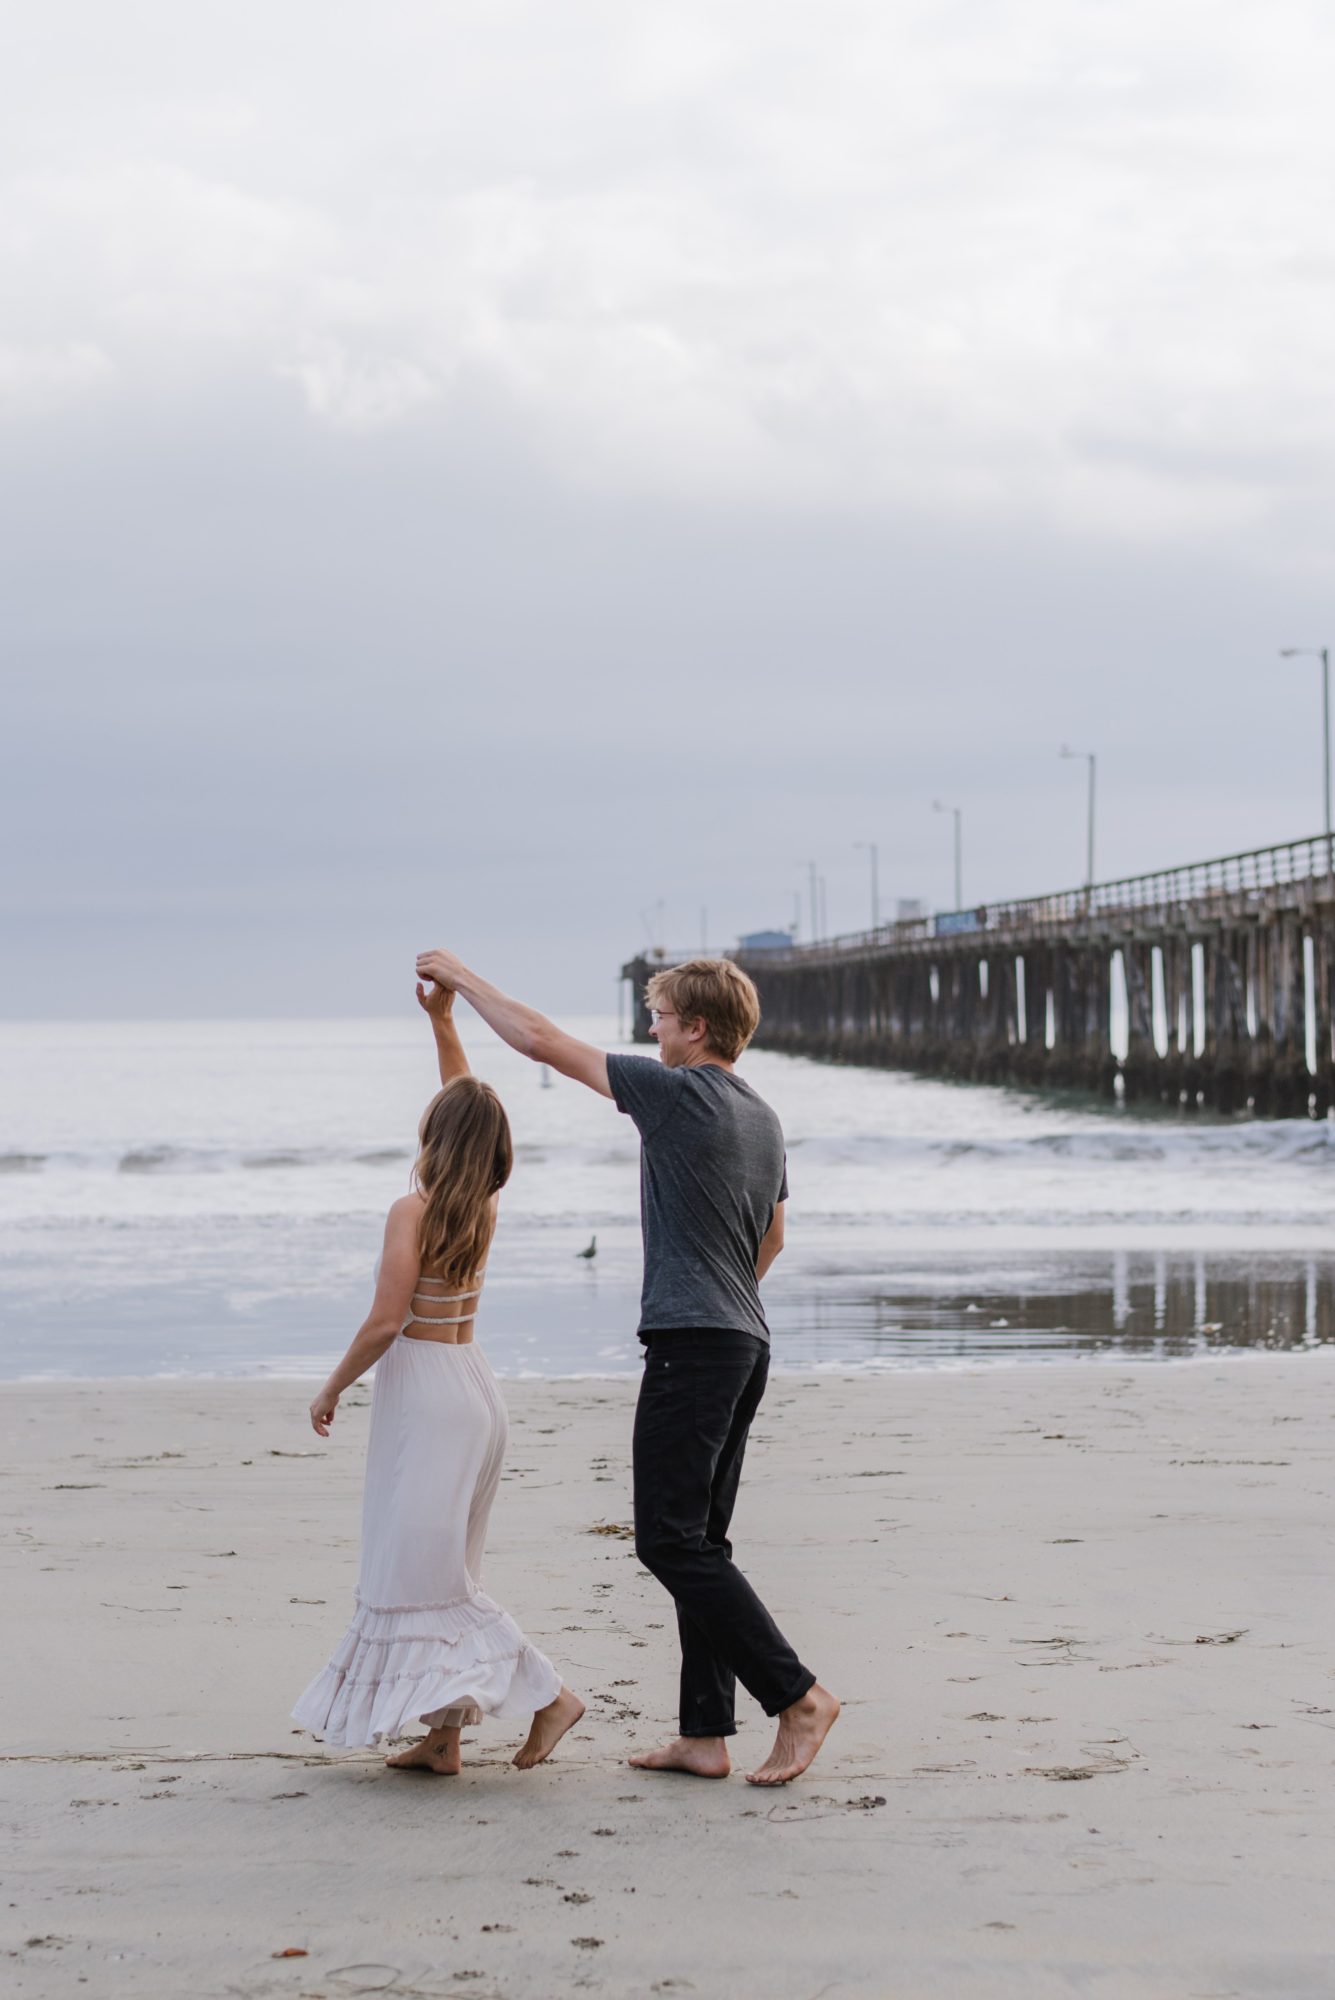 Man twirling woman during engagement session